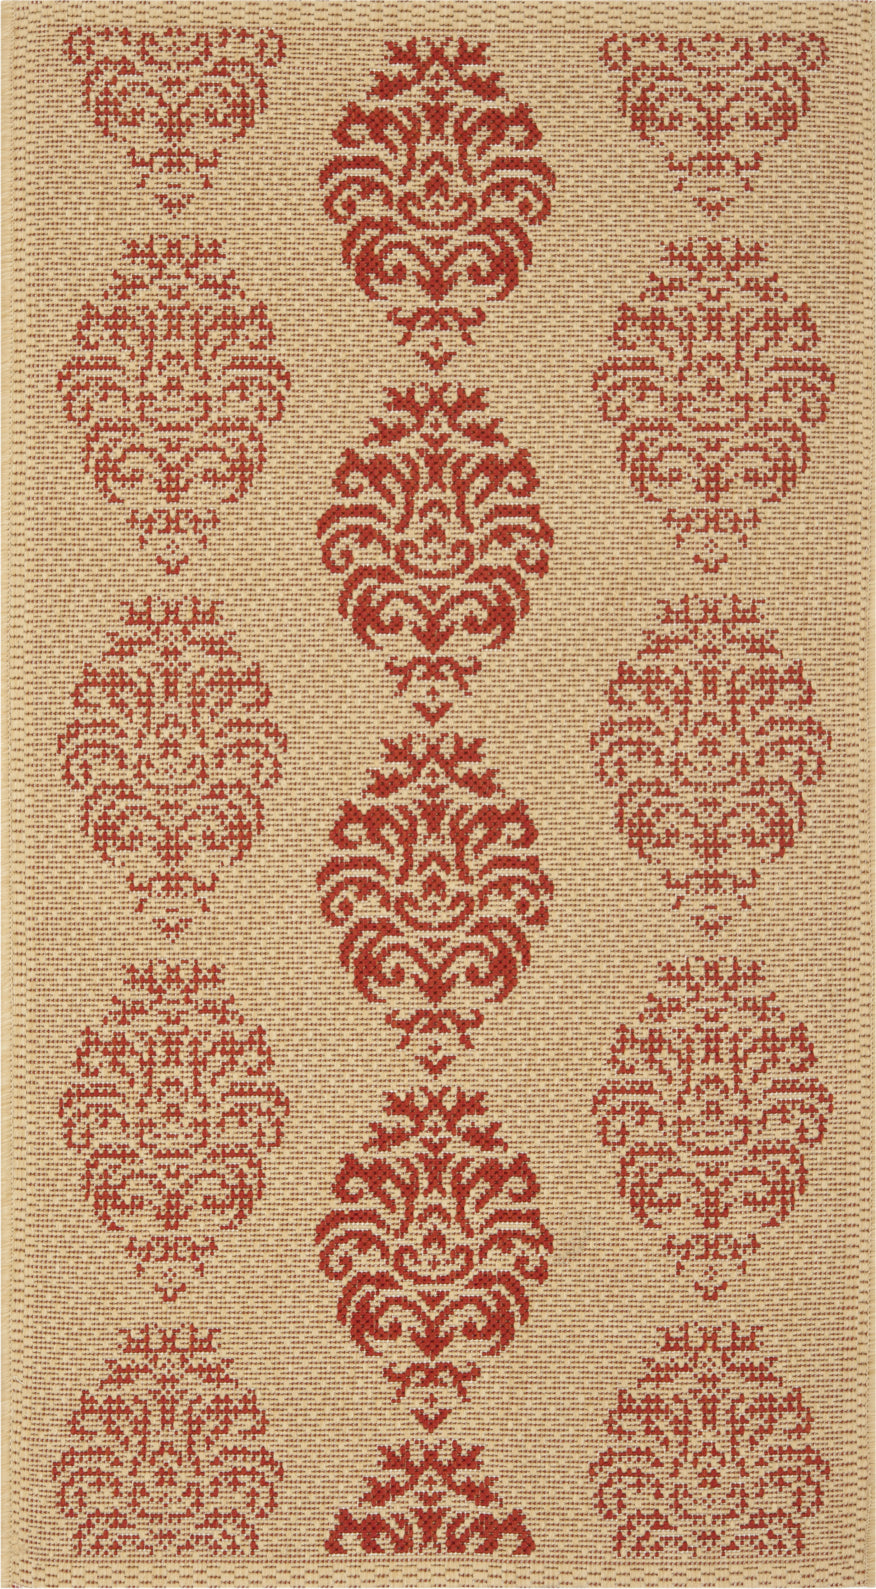 Safavieh Courtyard CY2720 Natural/Red Area Rug main image